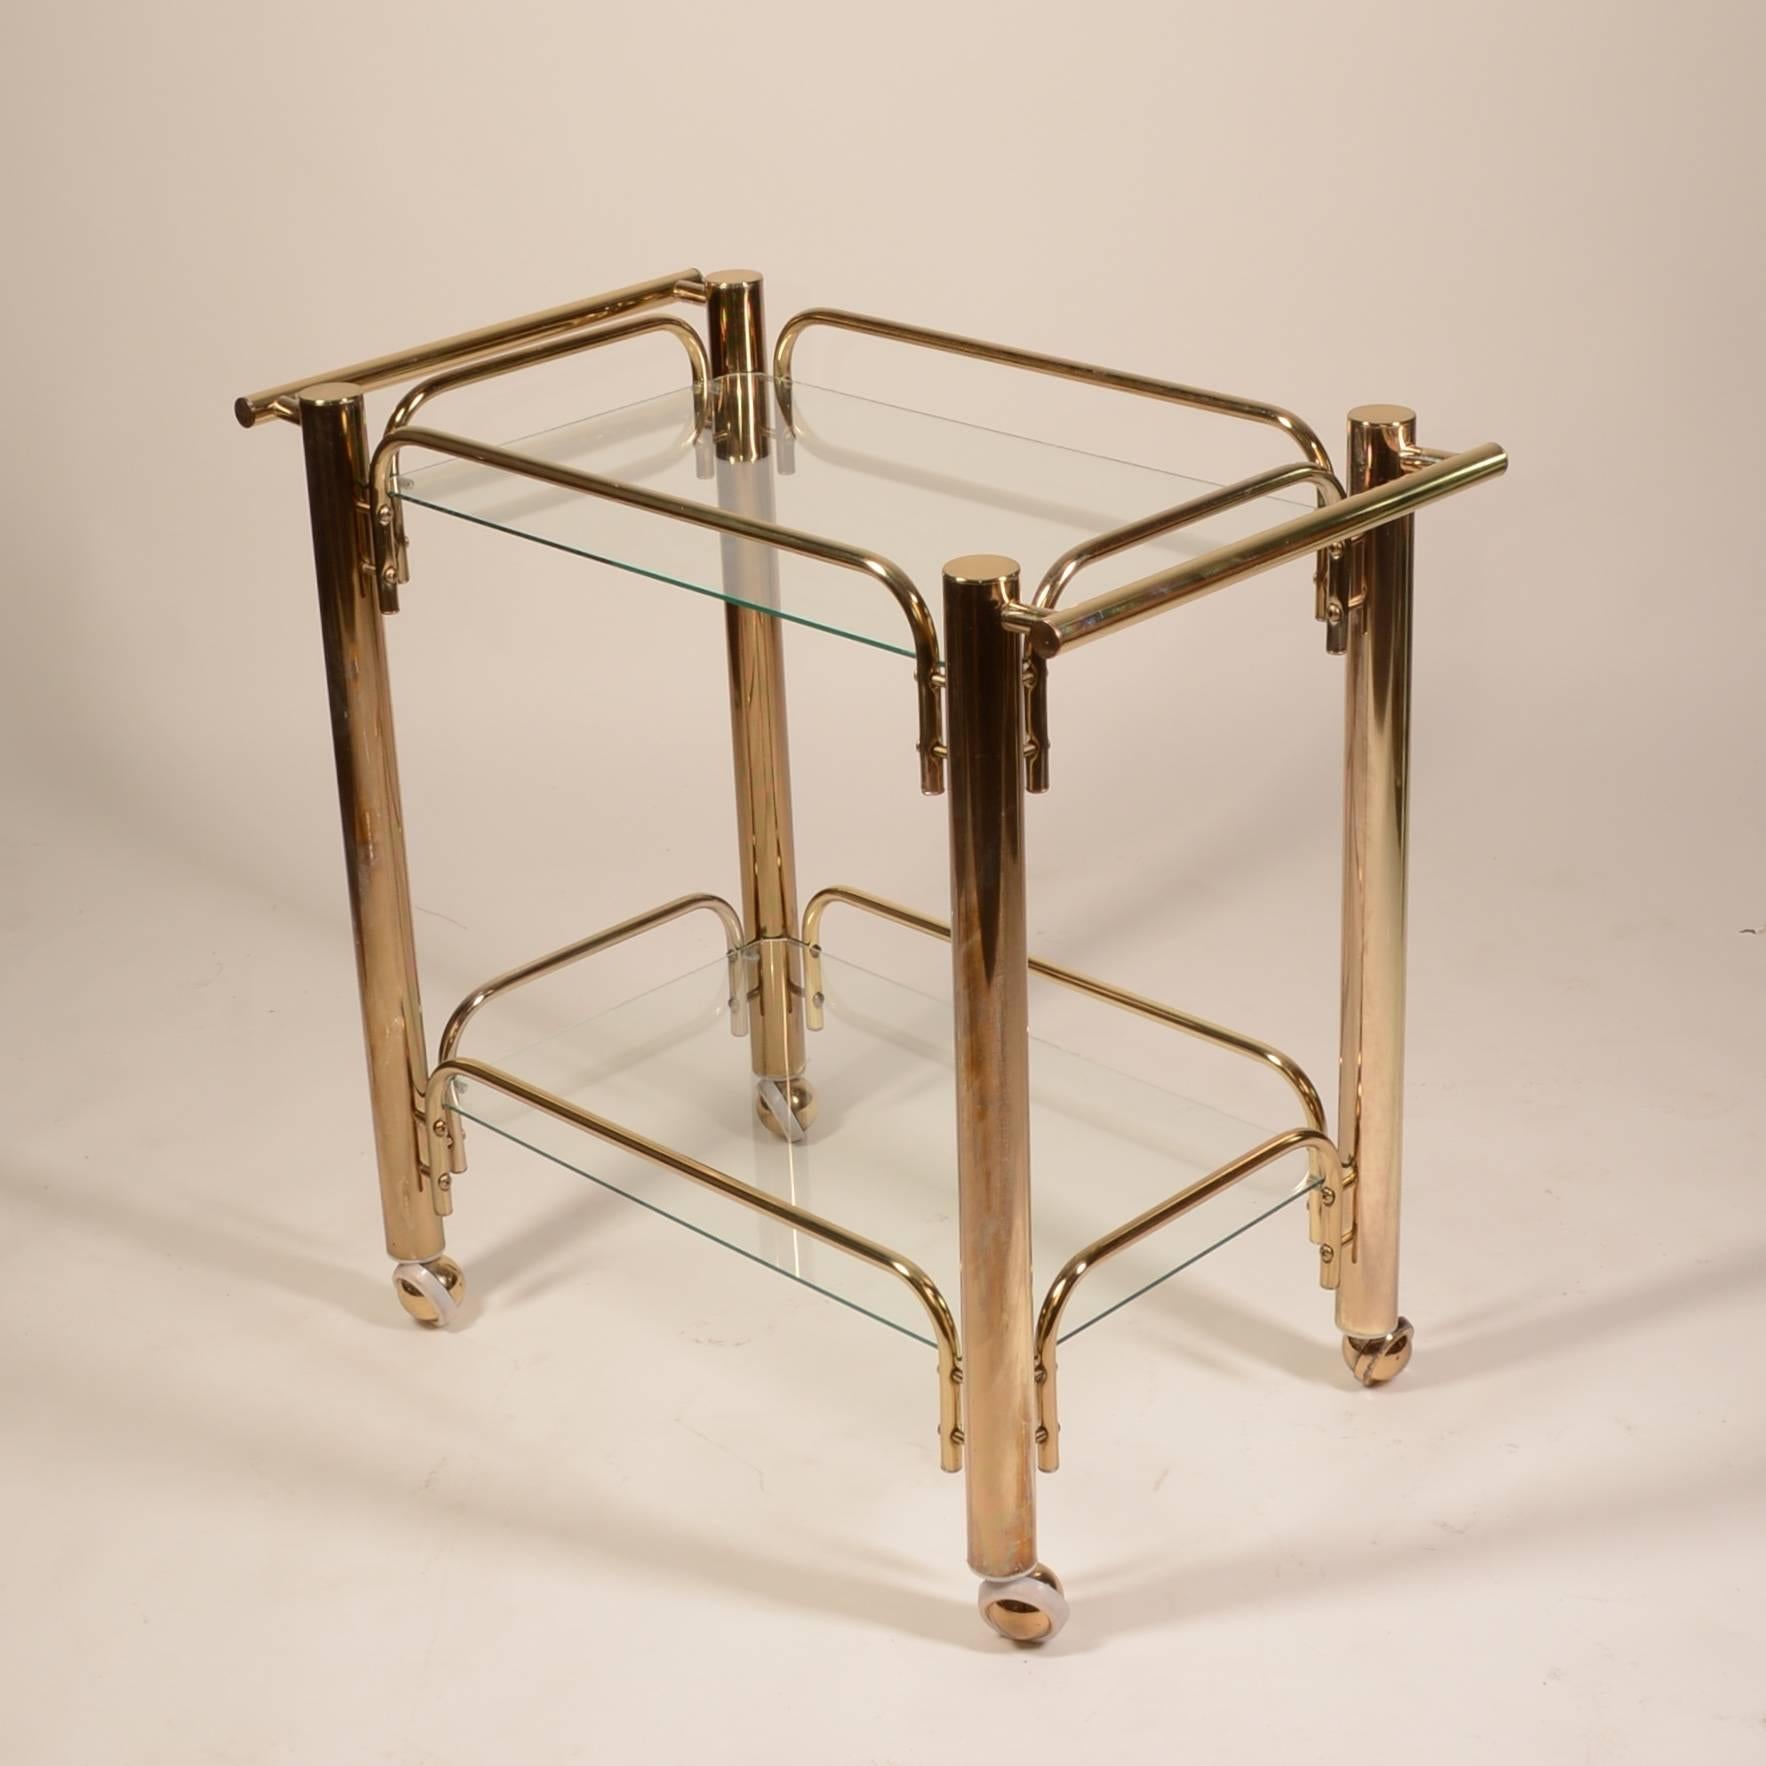 Made in Italy brass and glass rolling tea cart bar.